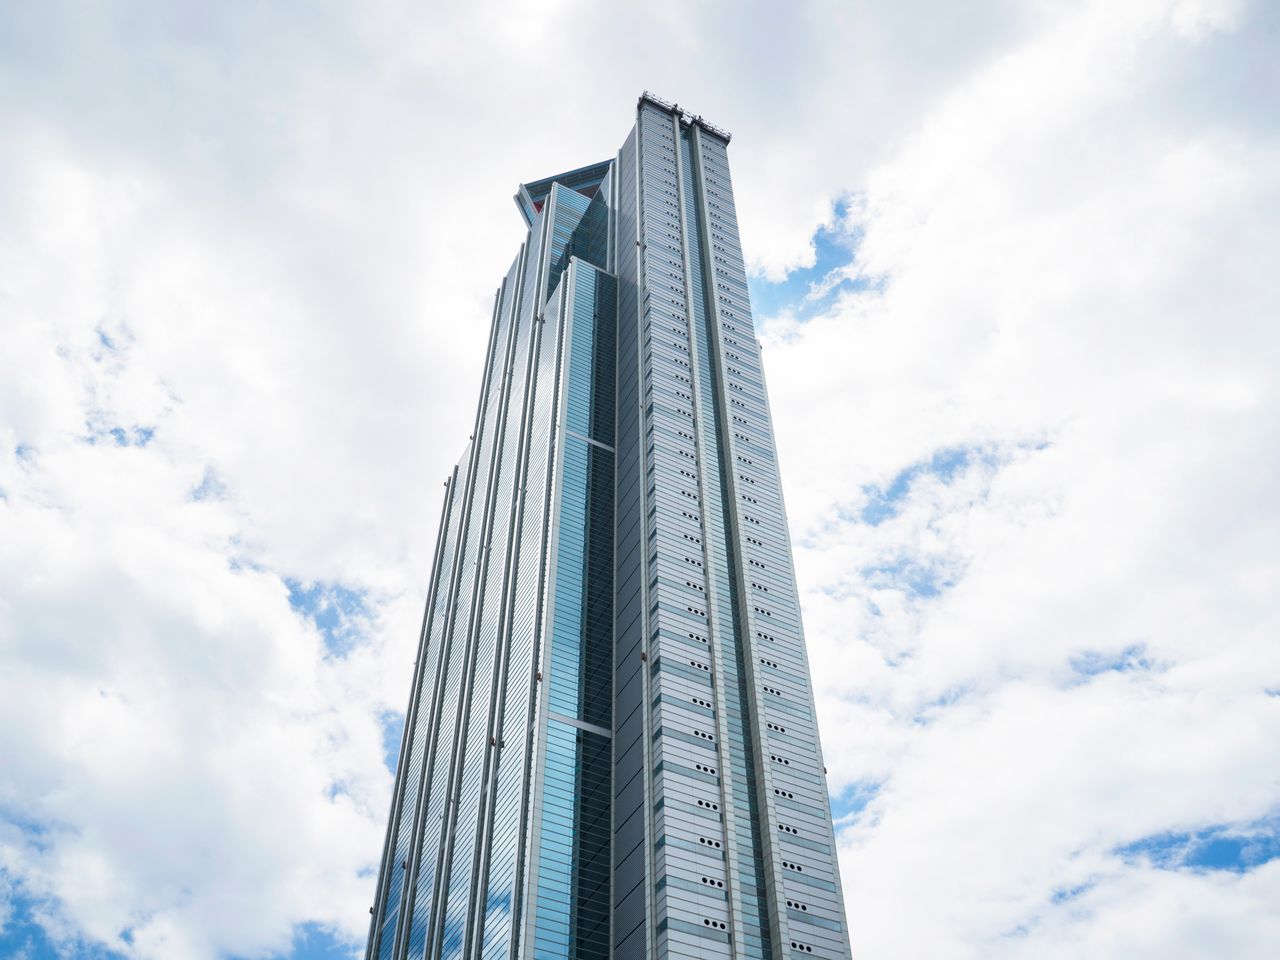 The Osaka Prefectural Government Sakishima Building, currently the landmark for the “Nishi” area.